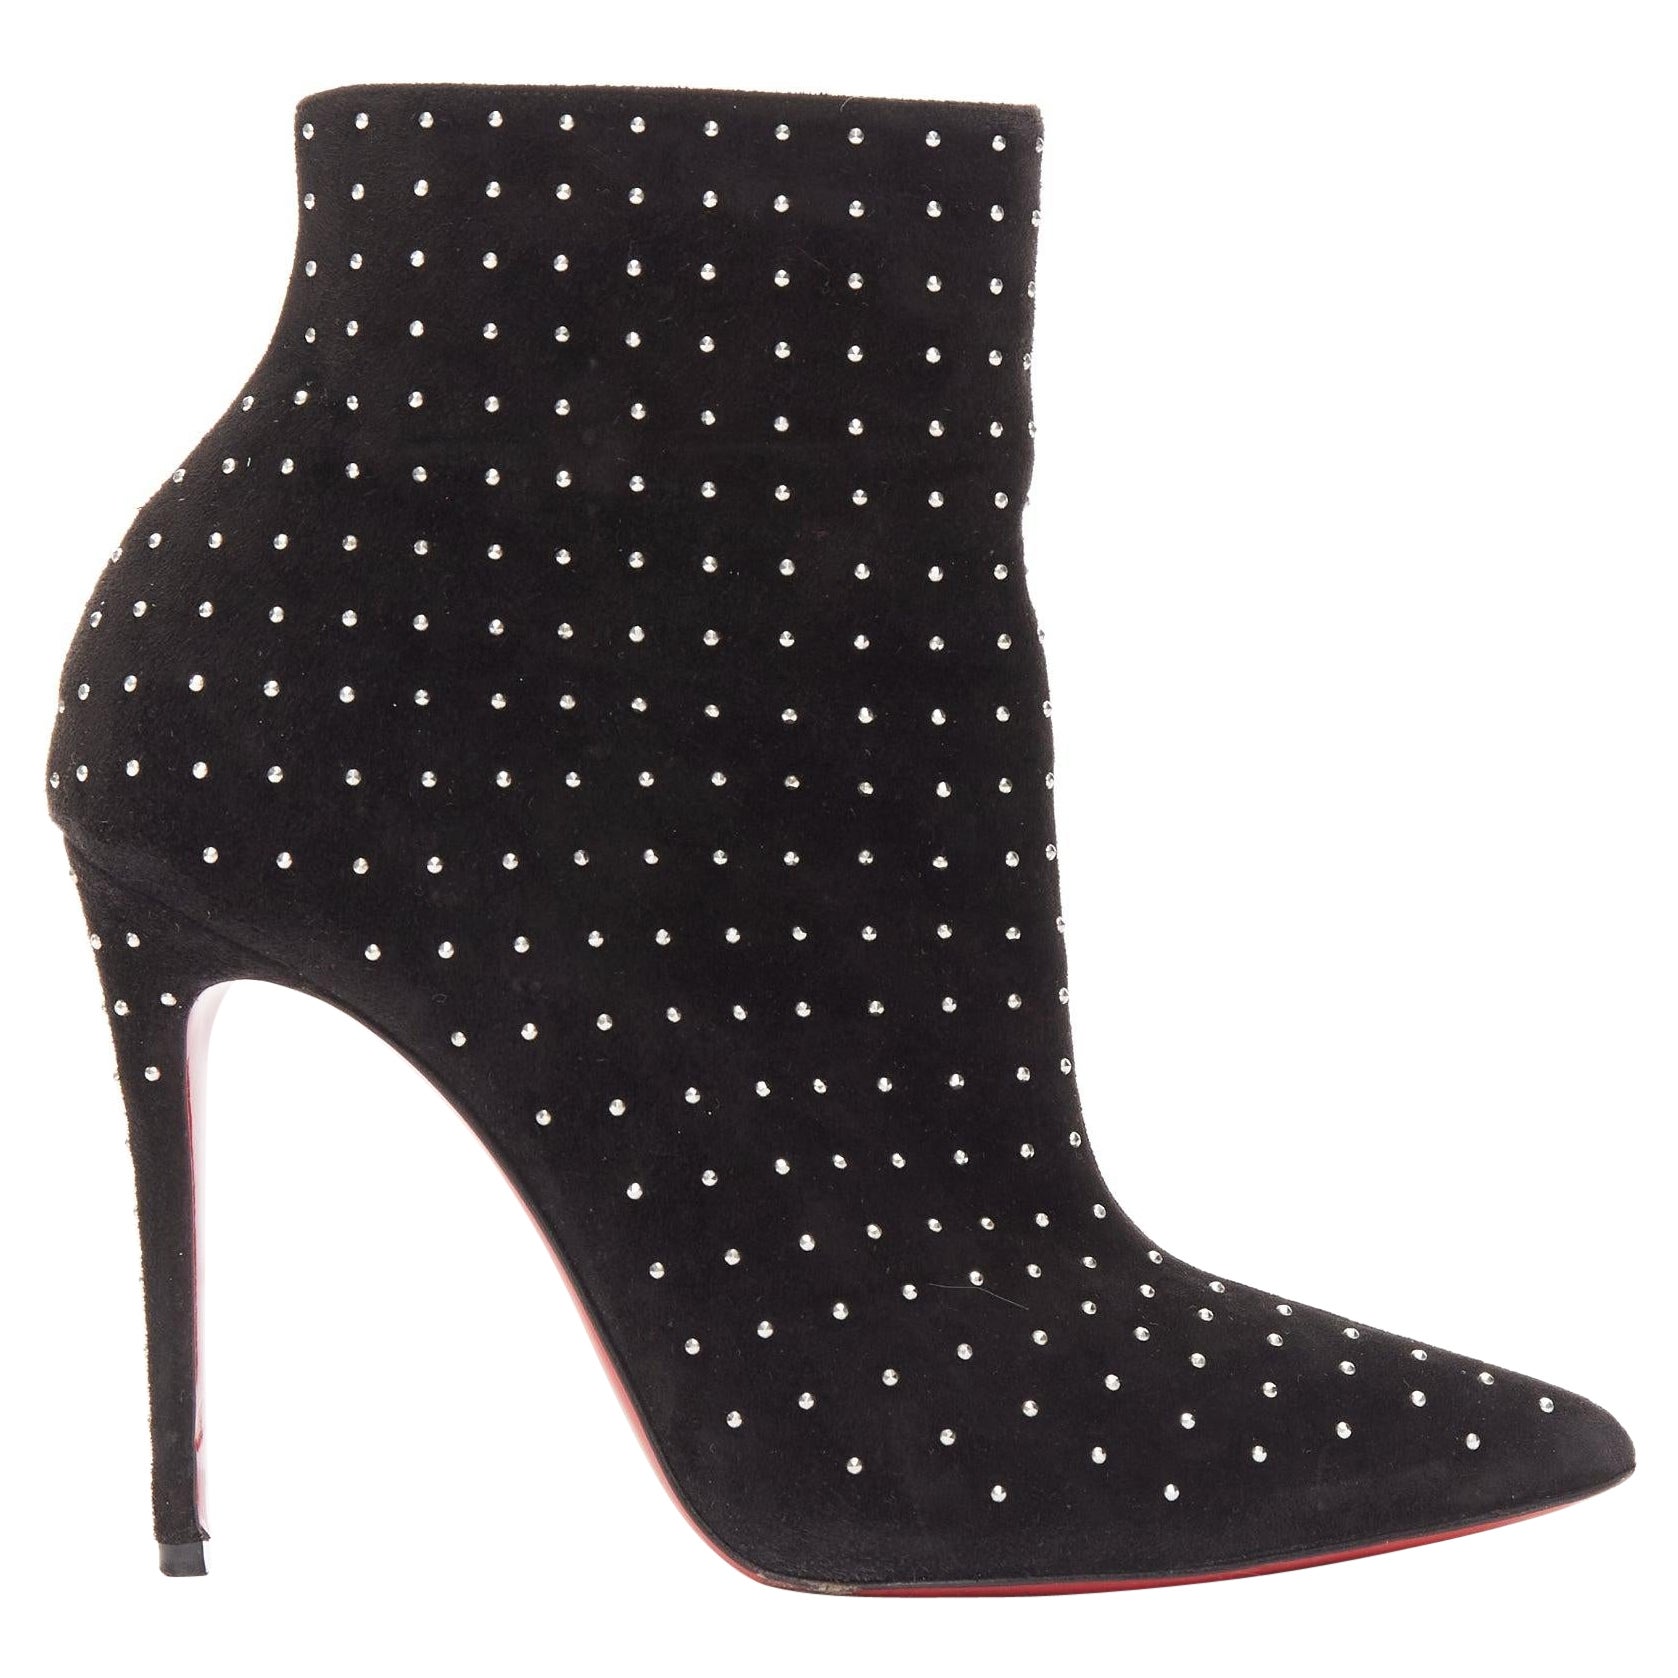 CHRISTIAN LOUBOUTIN So Kate Booty black suede micro stud embellished pointy EU36 For Sale